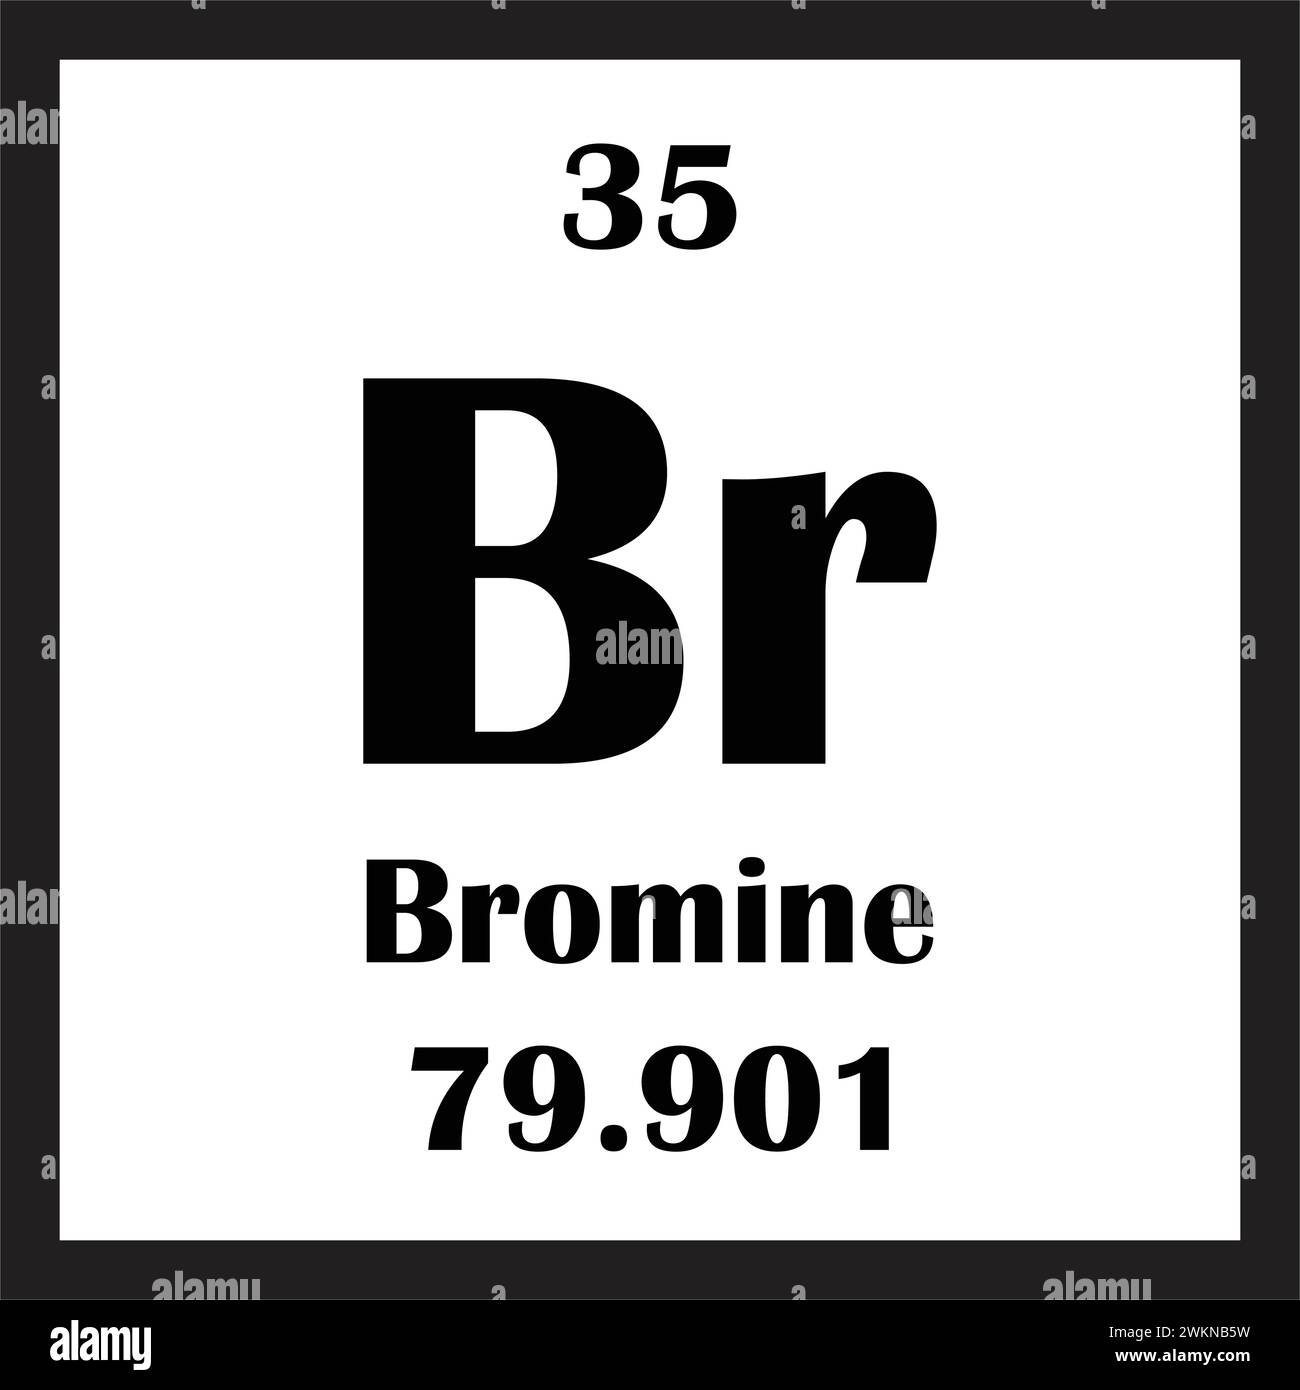 Bromine chemical element icon vector illustration design Stock Vector